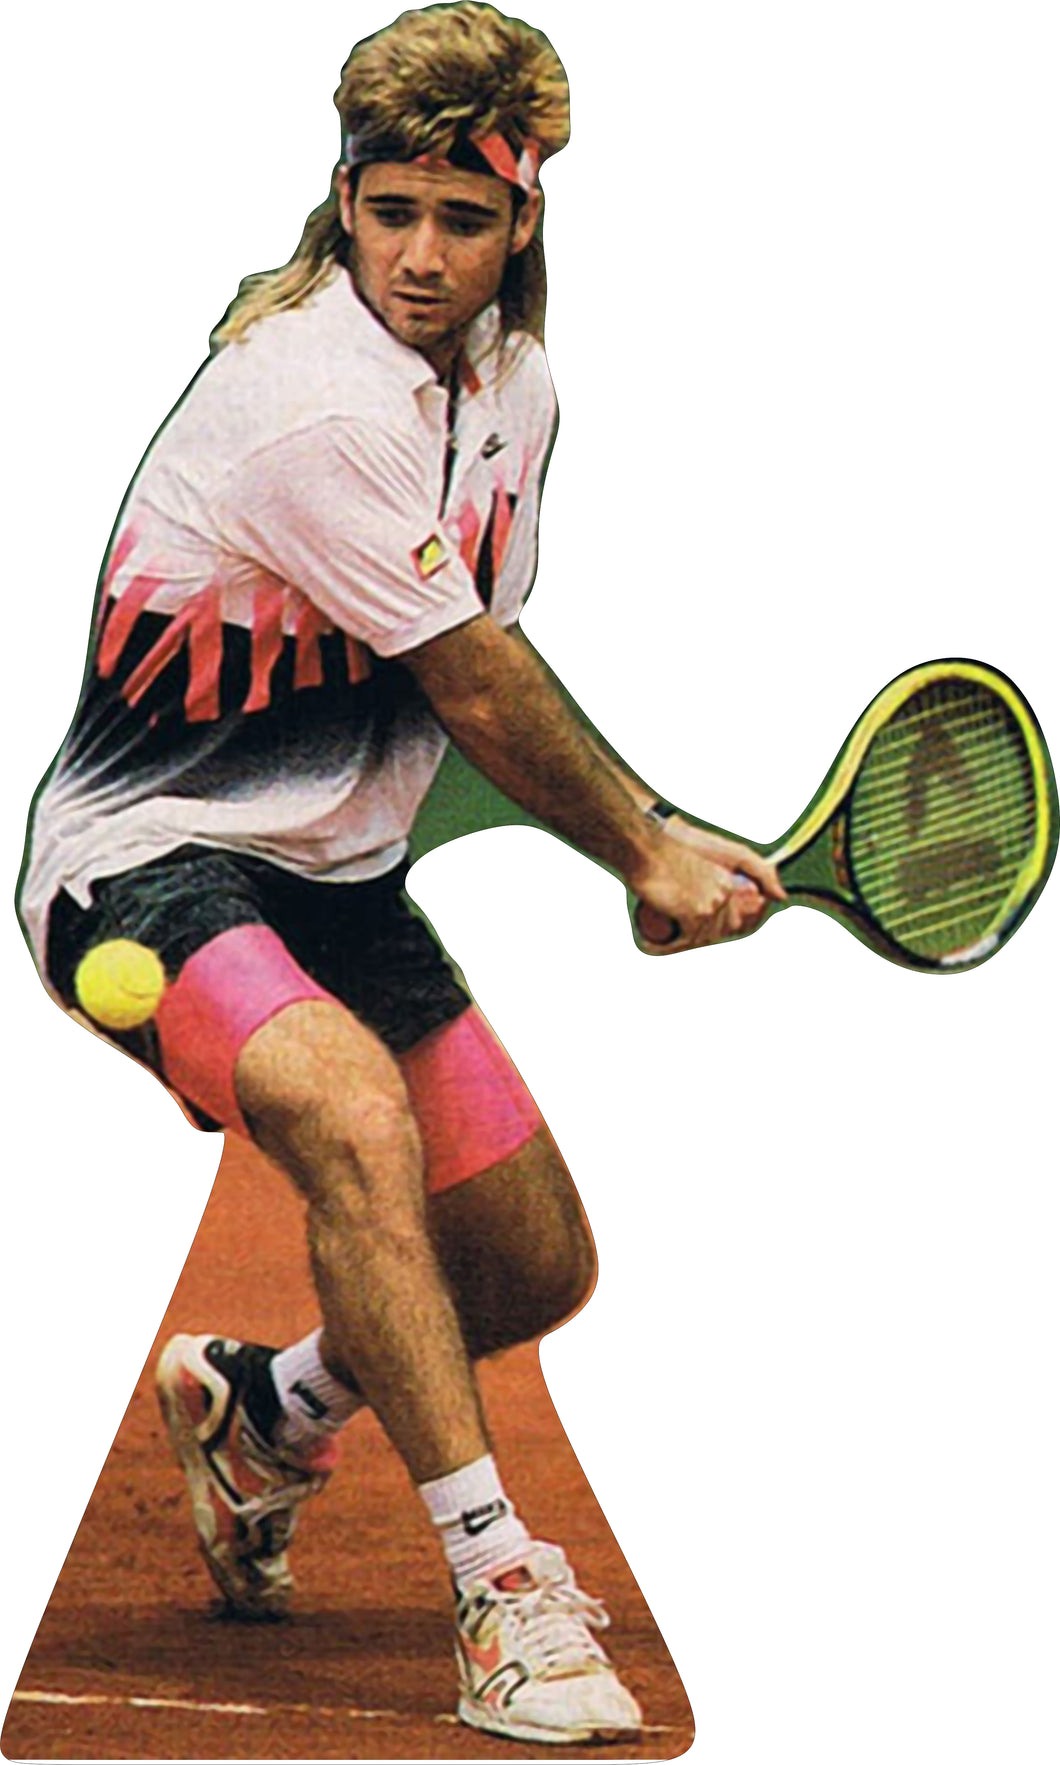 ANDRE AGASSI TENNIS CHAMPION - 71